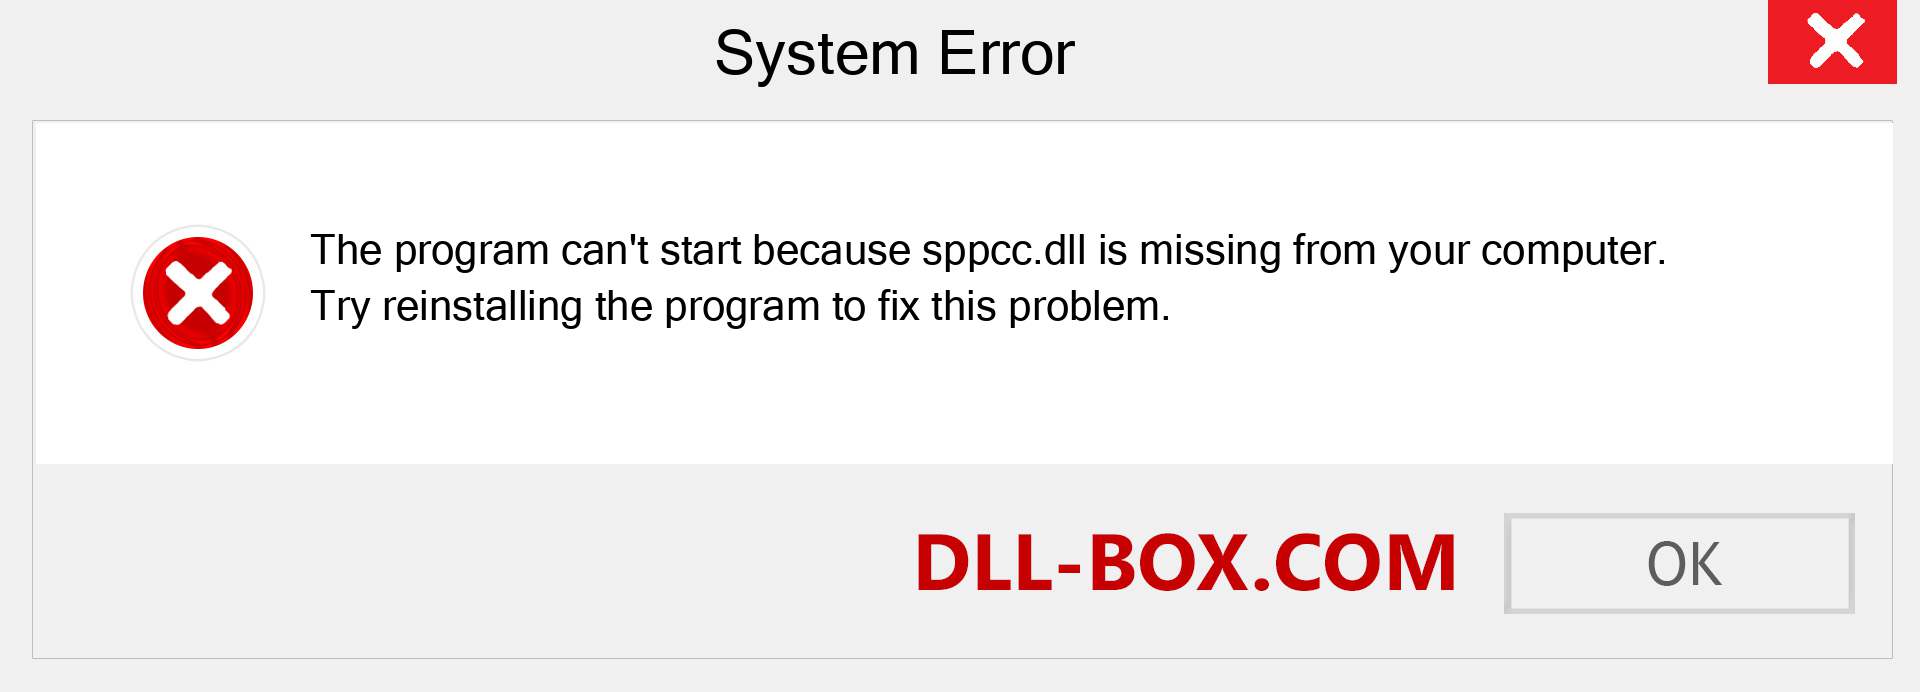  sppcc.dll file is missing?. Download for Windows 7, 8, 10 - Fix  sppcc dll Missing Error on Windows, photos, images